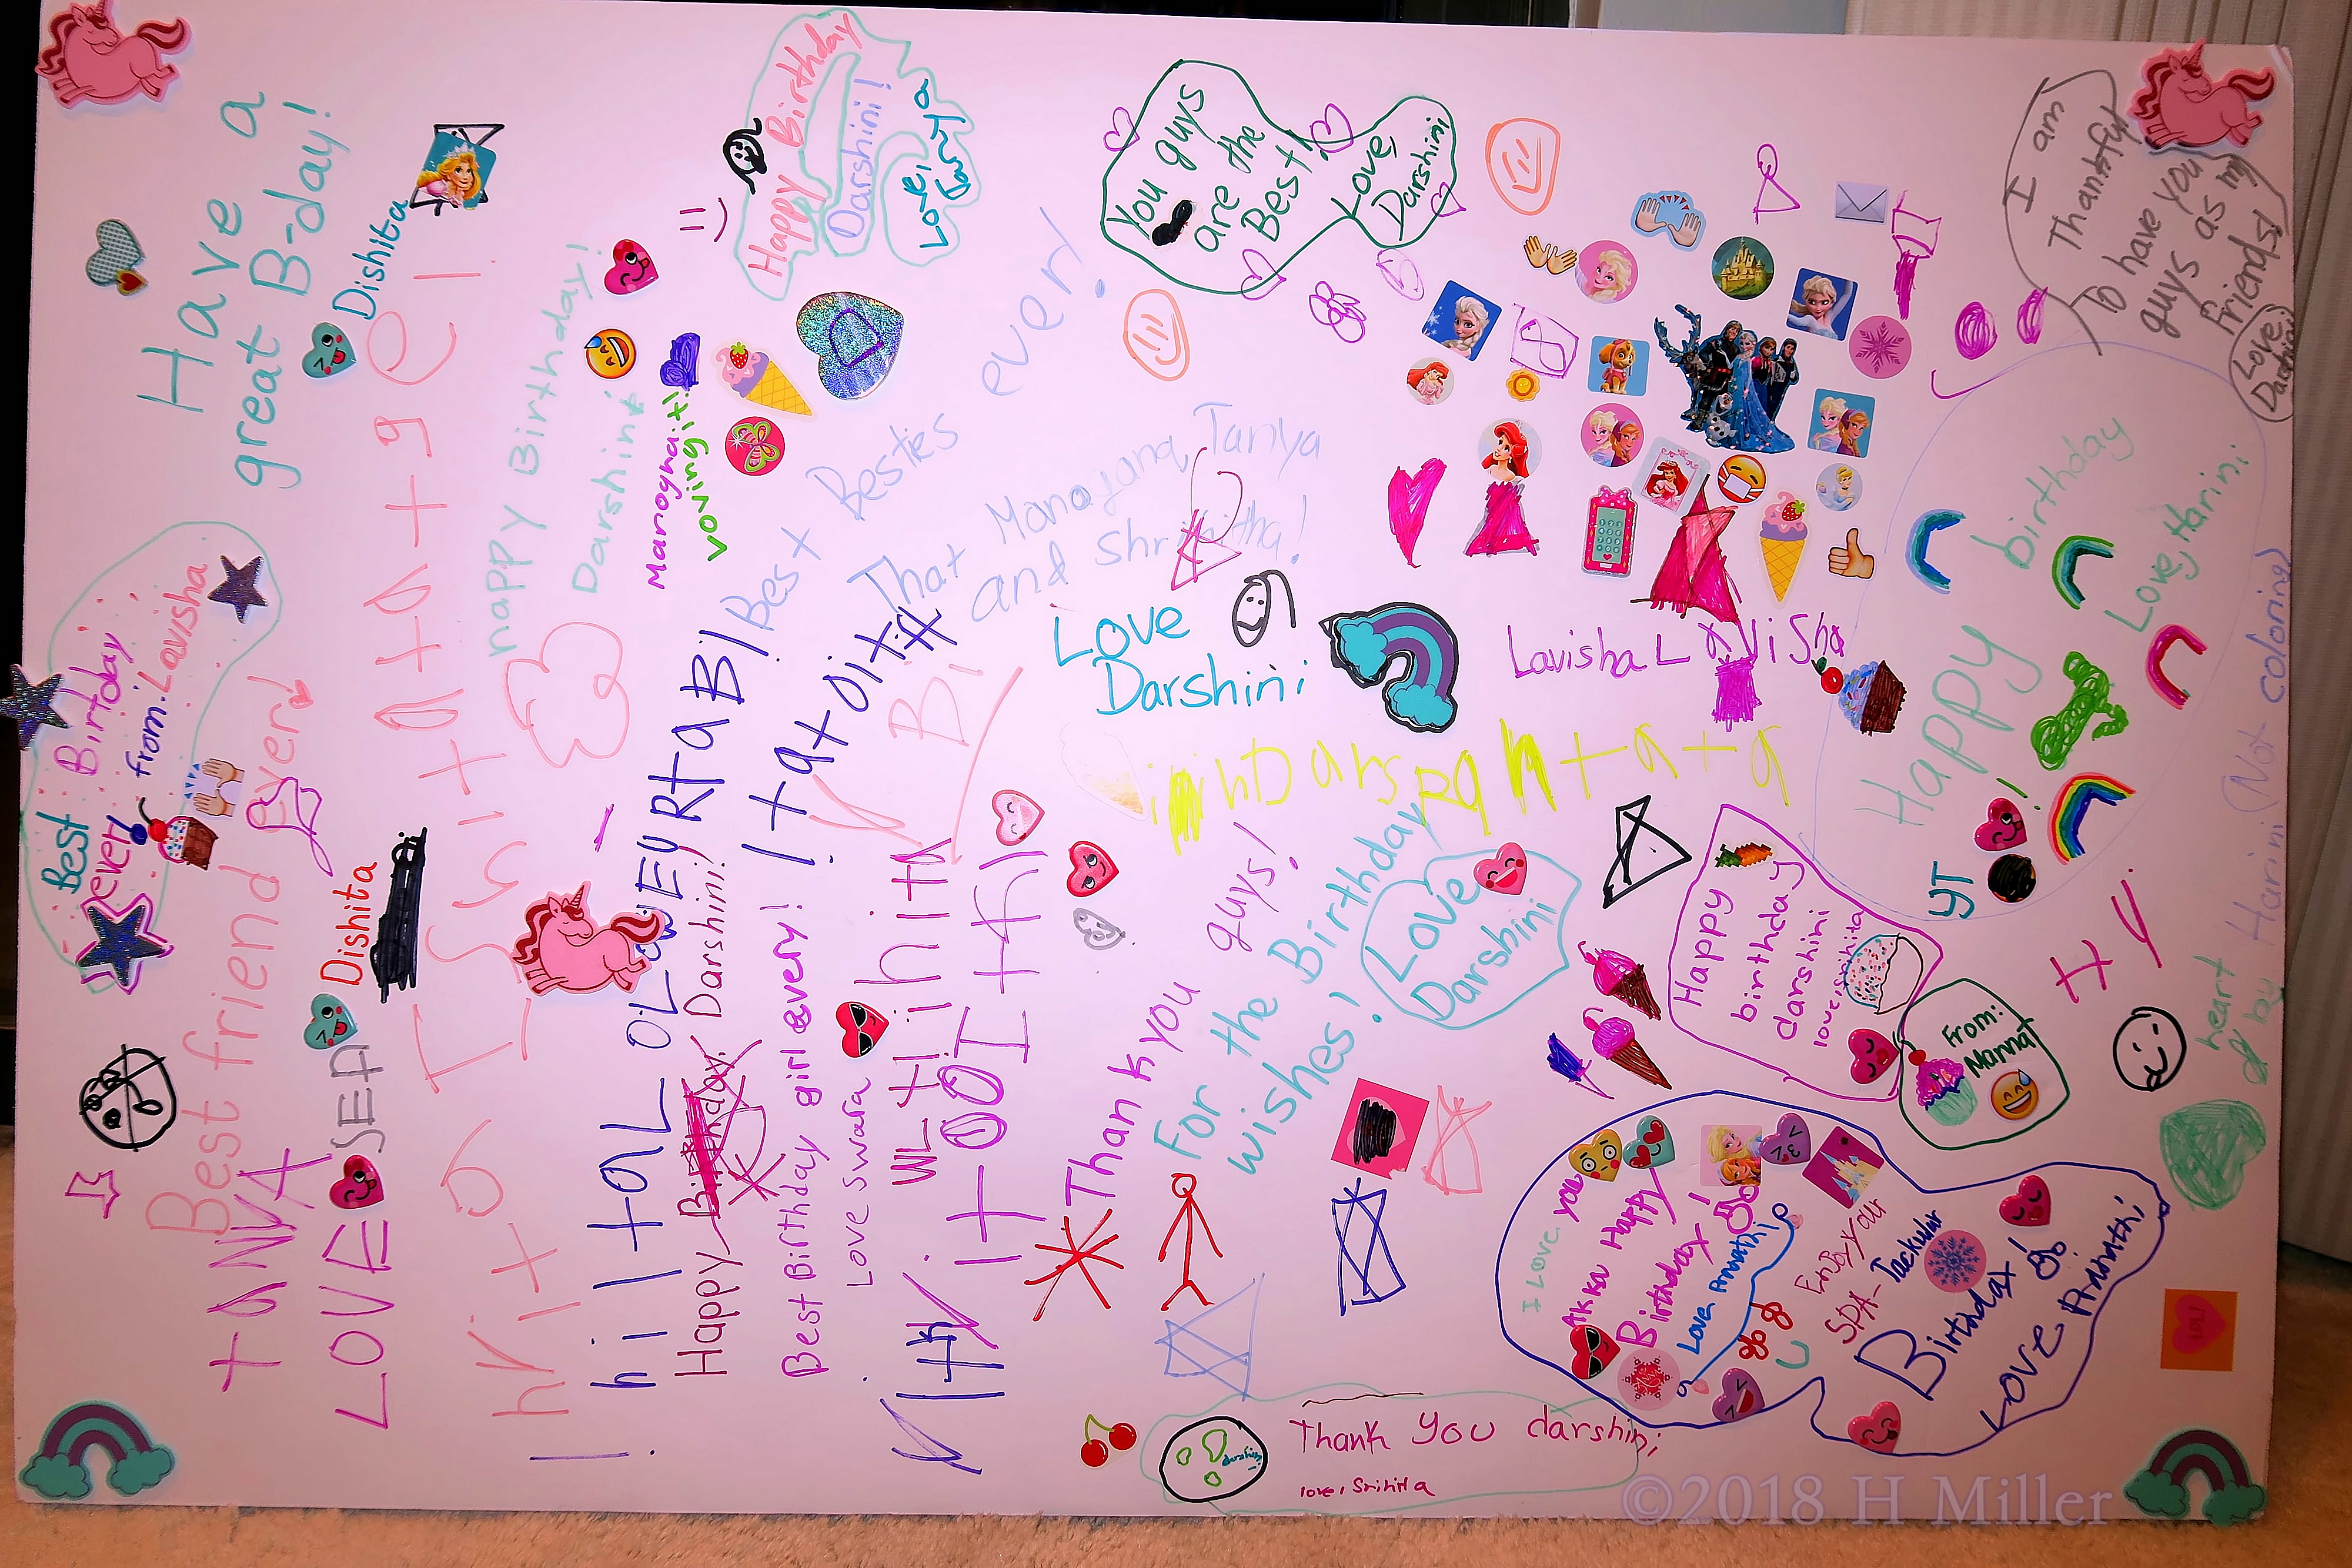 Lovely Messages On The Spa Birthday Card For Darshini By Her Friends. 4